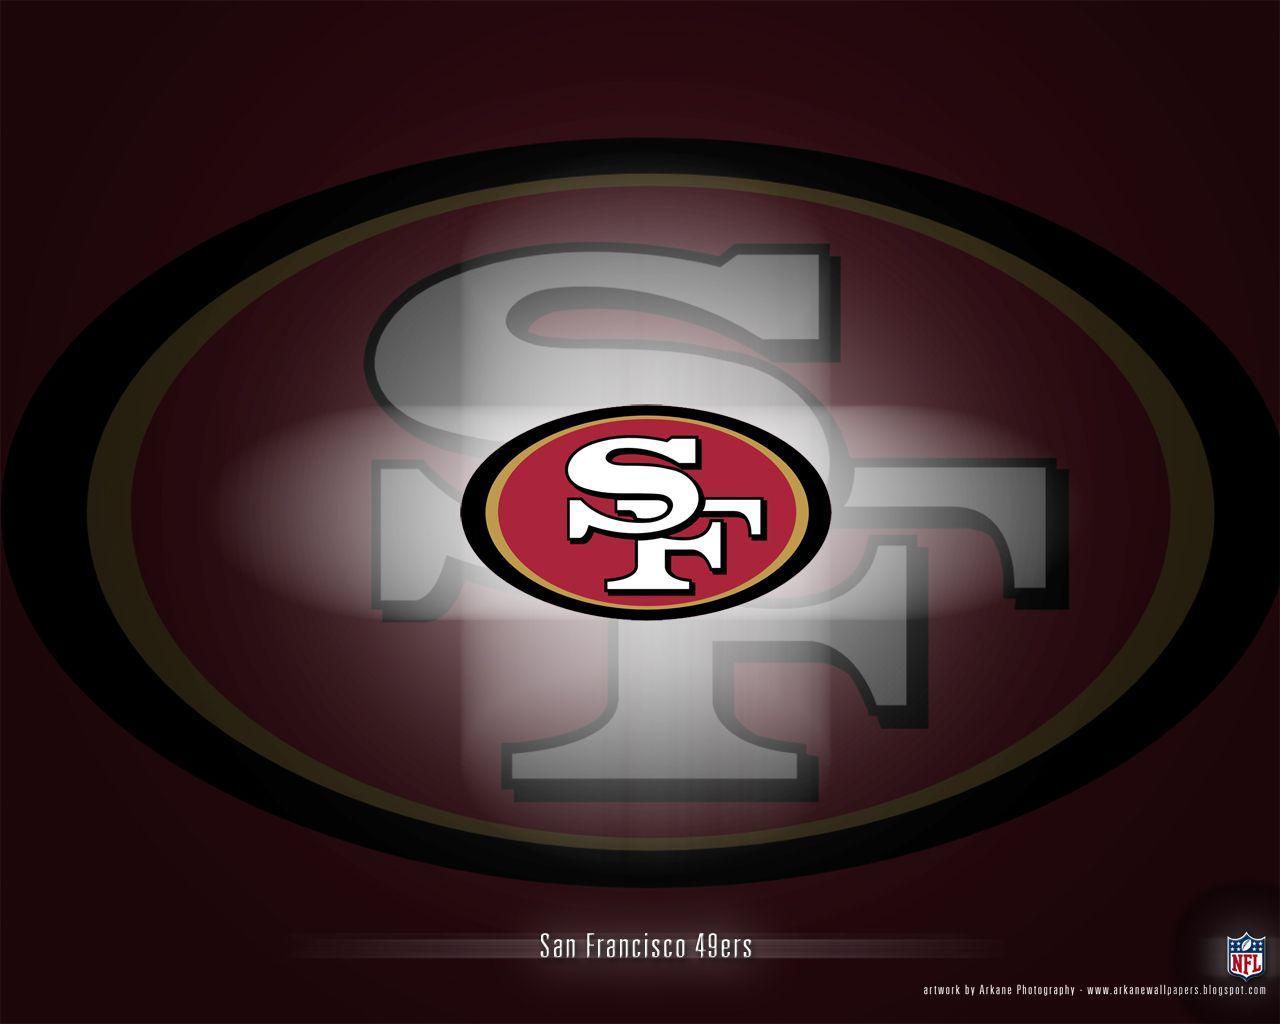 Best image about 49ers!!!. Football, 49ers game